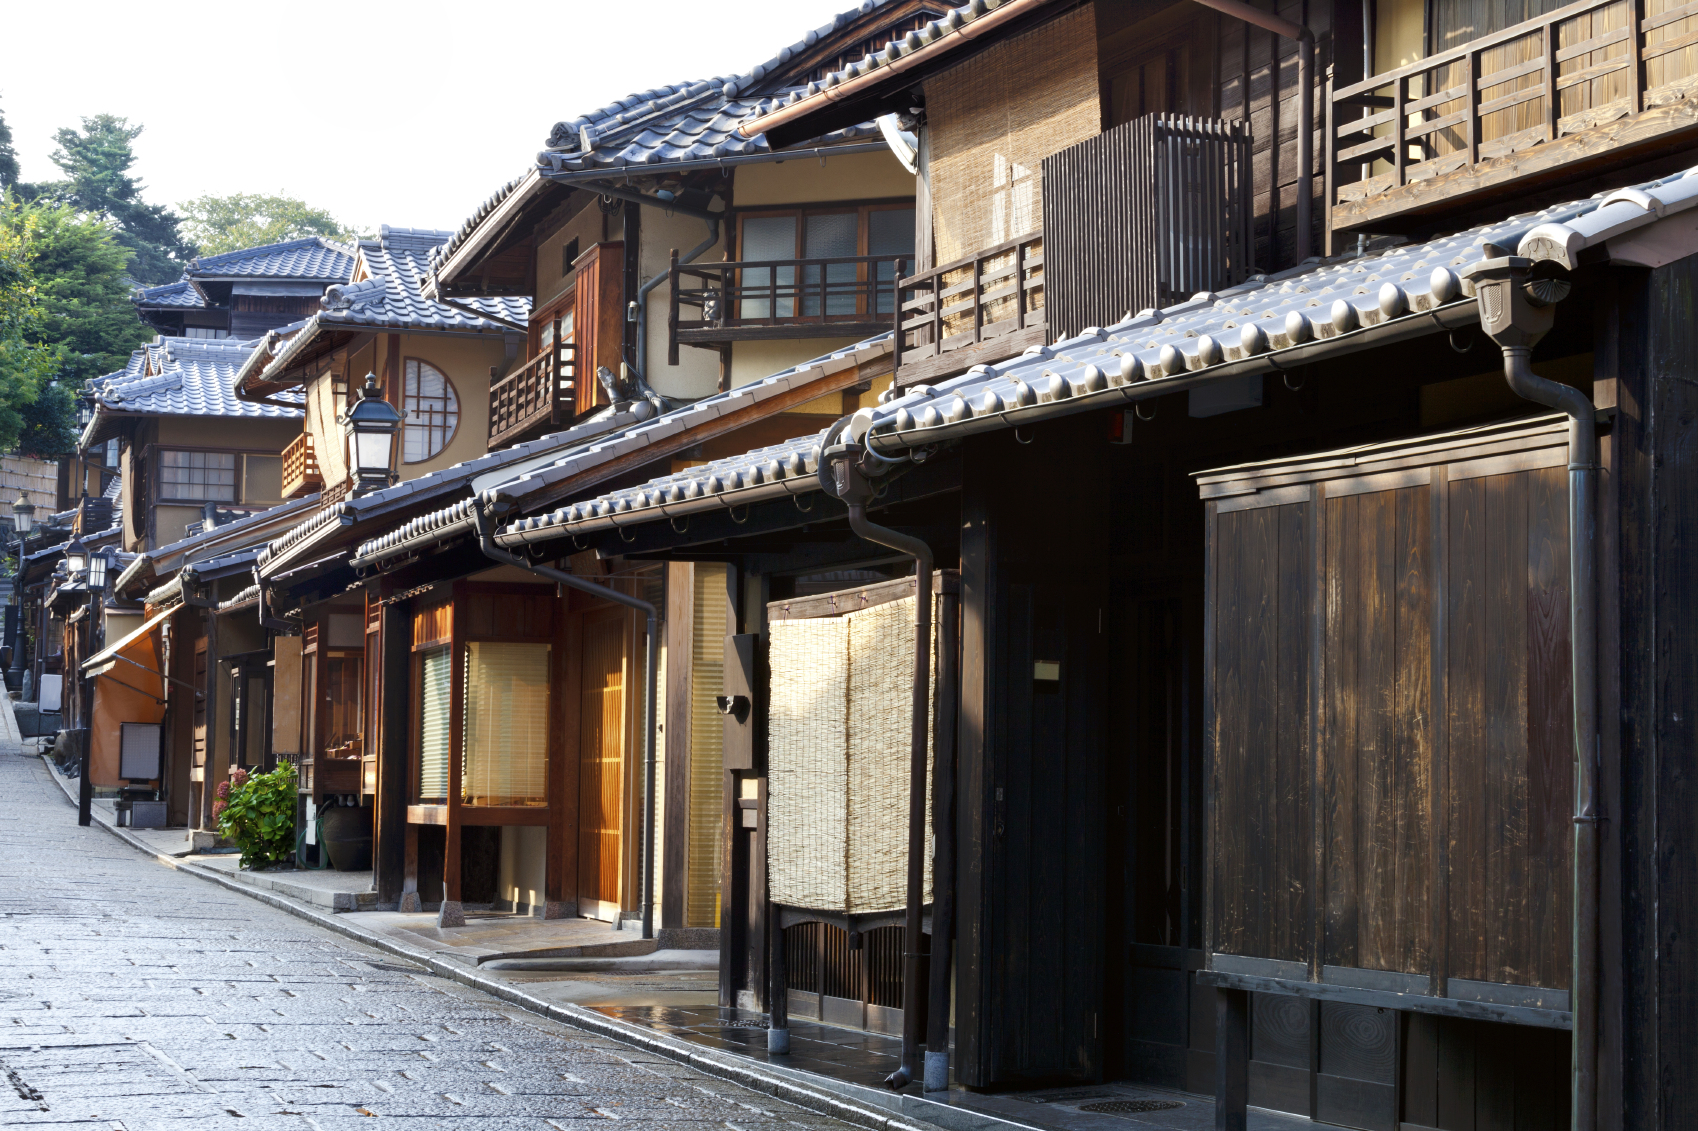 Street of old wooden houses in historic Kyoto Japan